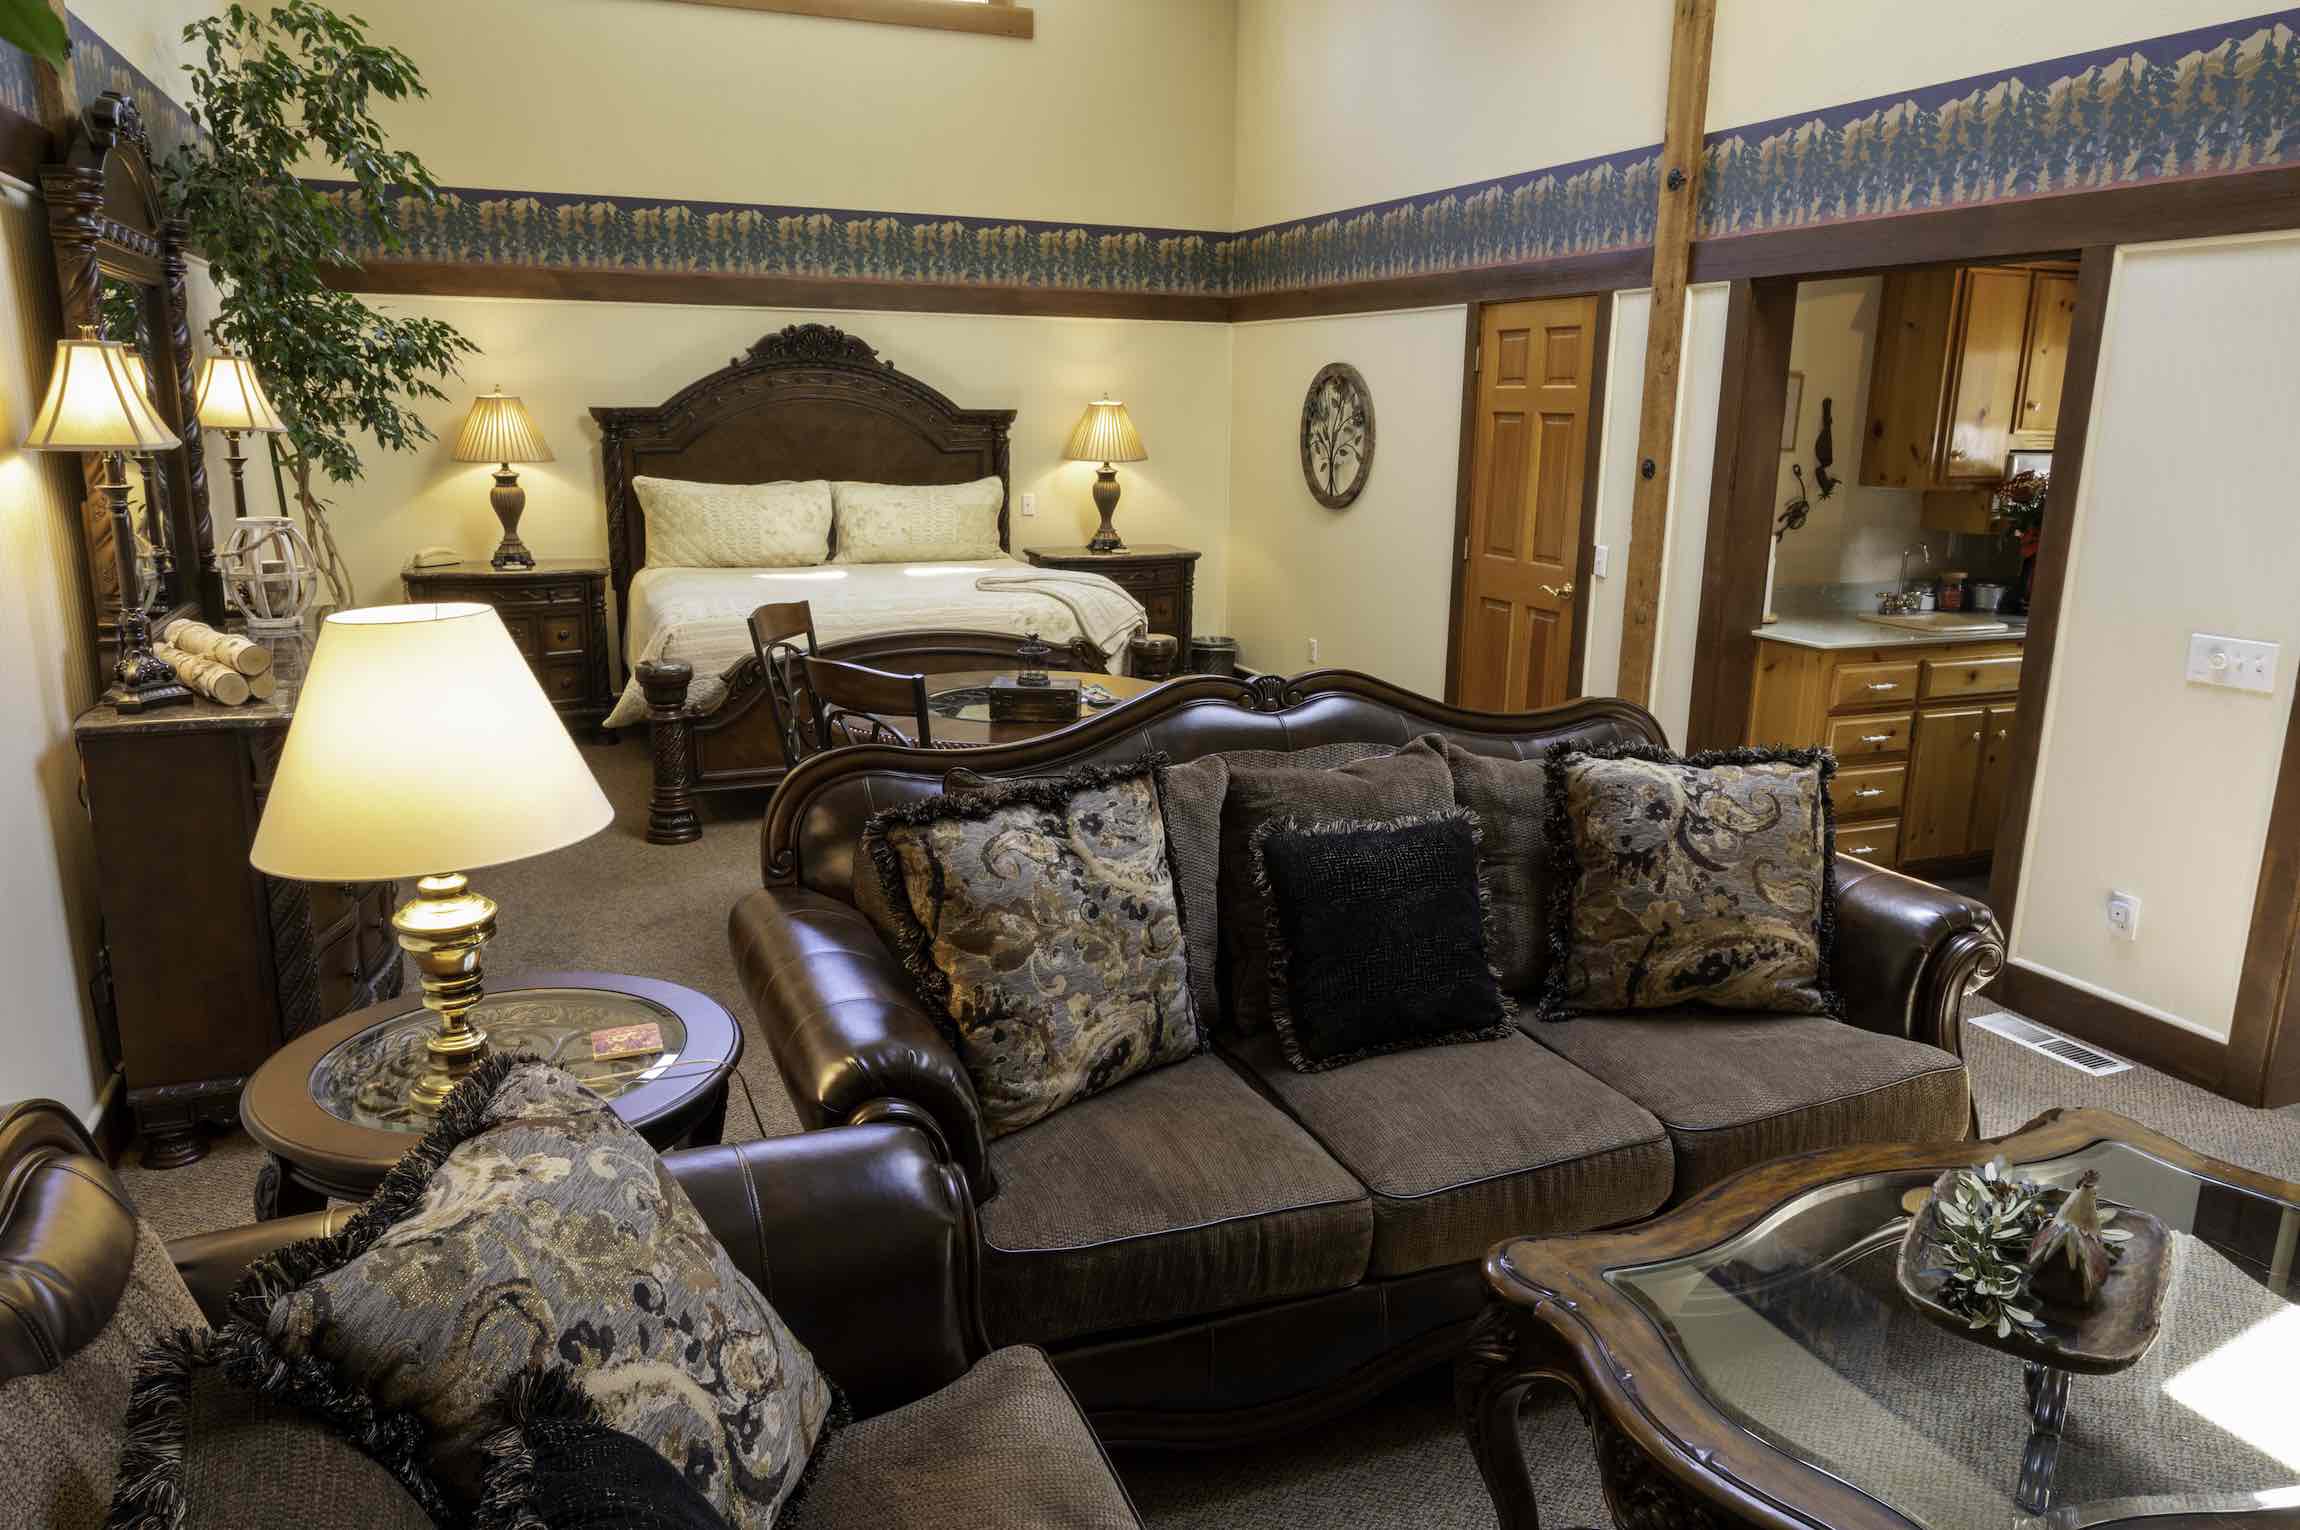 A fireplace warms the living room of the Pine Ridge Suite at Country Willows Inn & Estate in Ashland, Oregon. The Pine Ridge Suite has a jacuzzi hot tub.